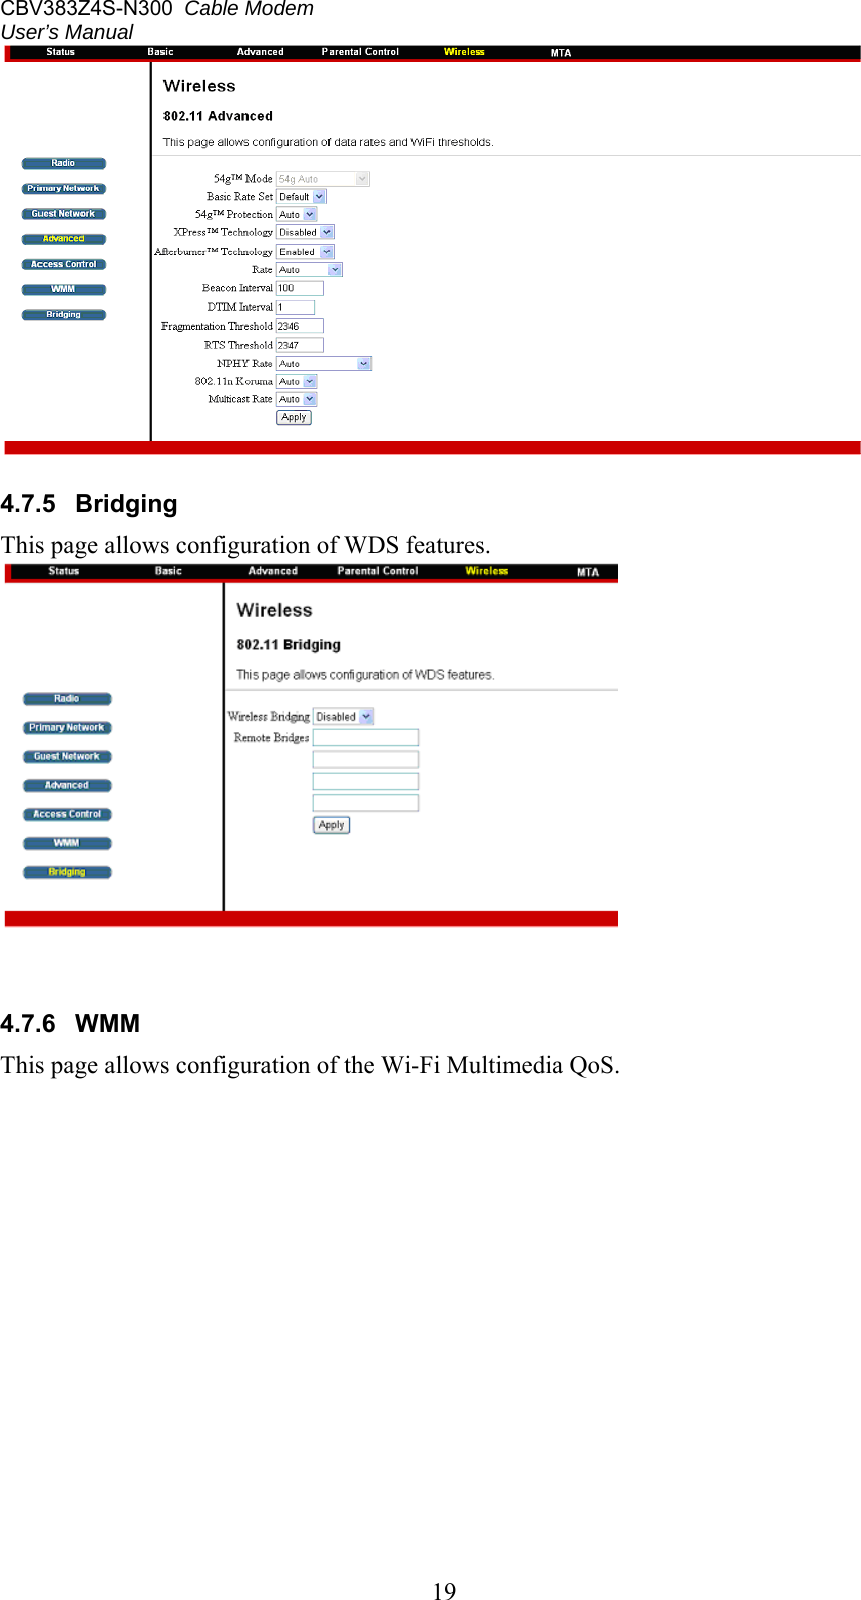 CBV383Z4S-N300  Cable Modem  User’s Manual   19  4.7.5  Bridging This page allows configuration of WDS features.    4.7.6  WMM This page allows configuration of the Wi-Fi Multimedia QoS.   